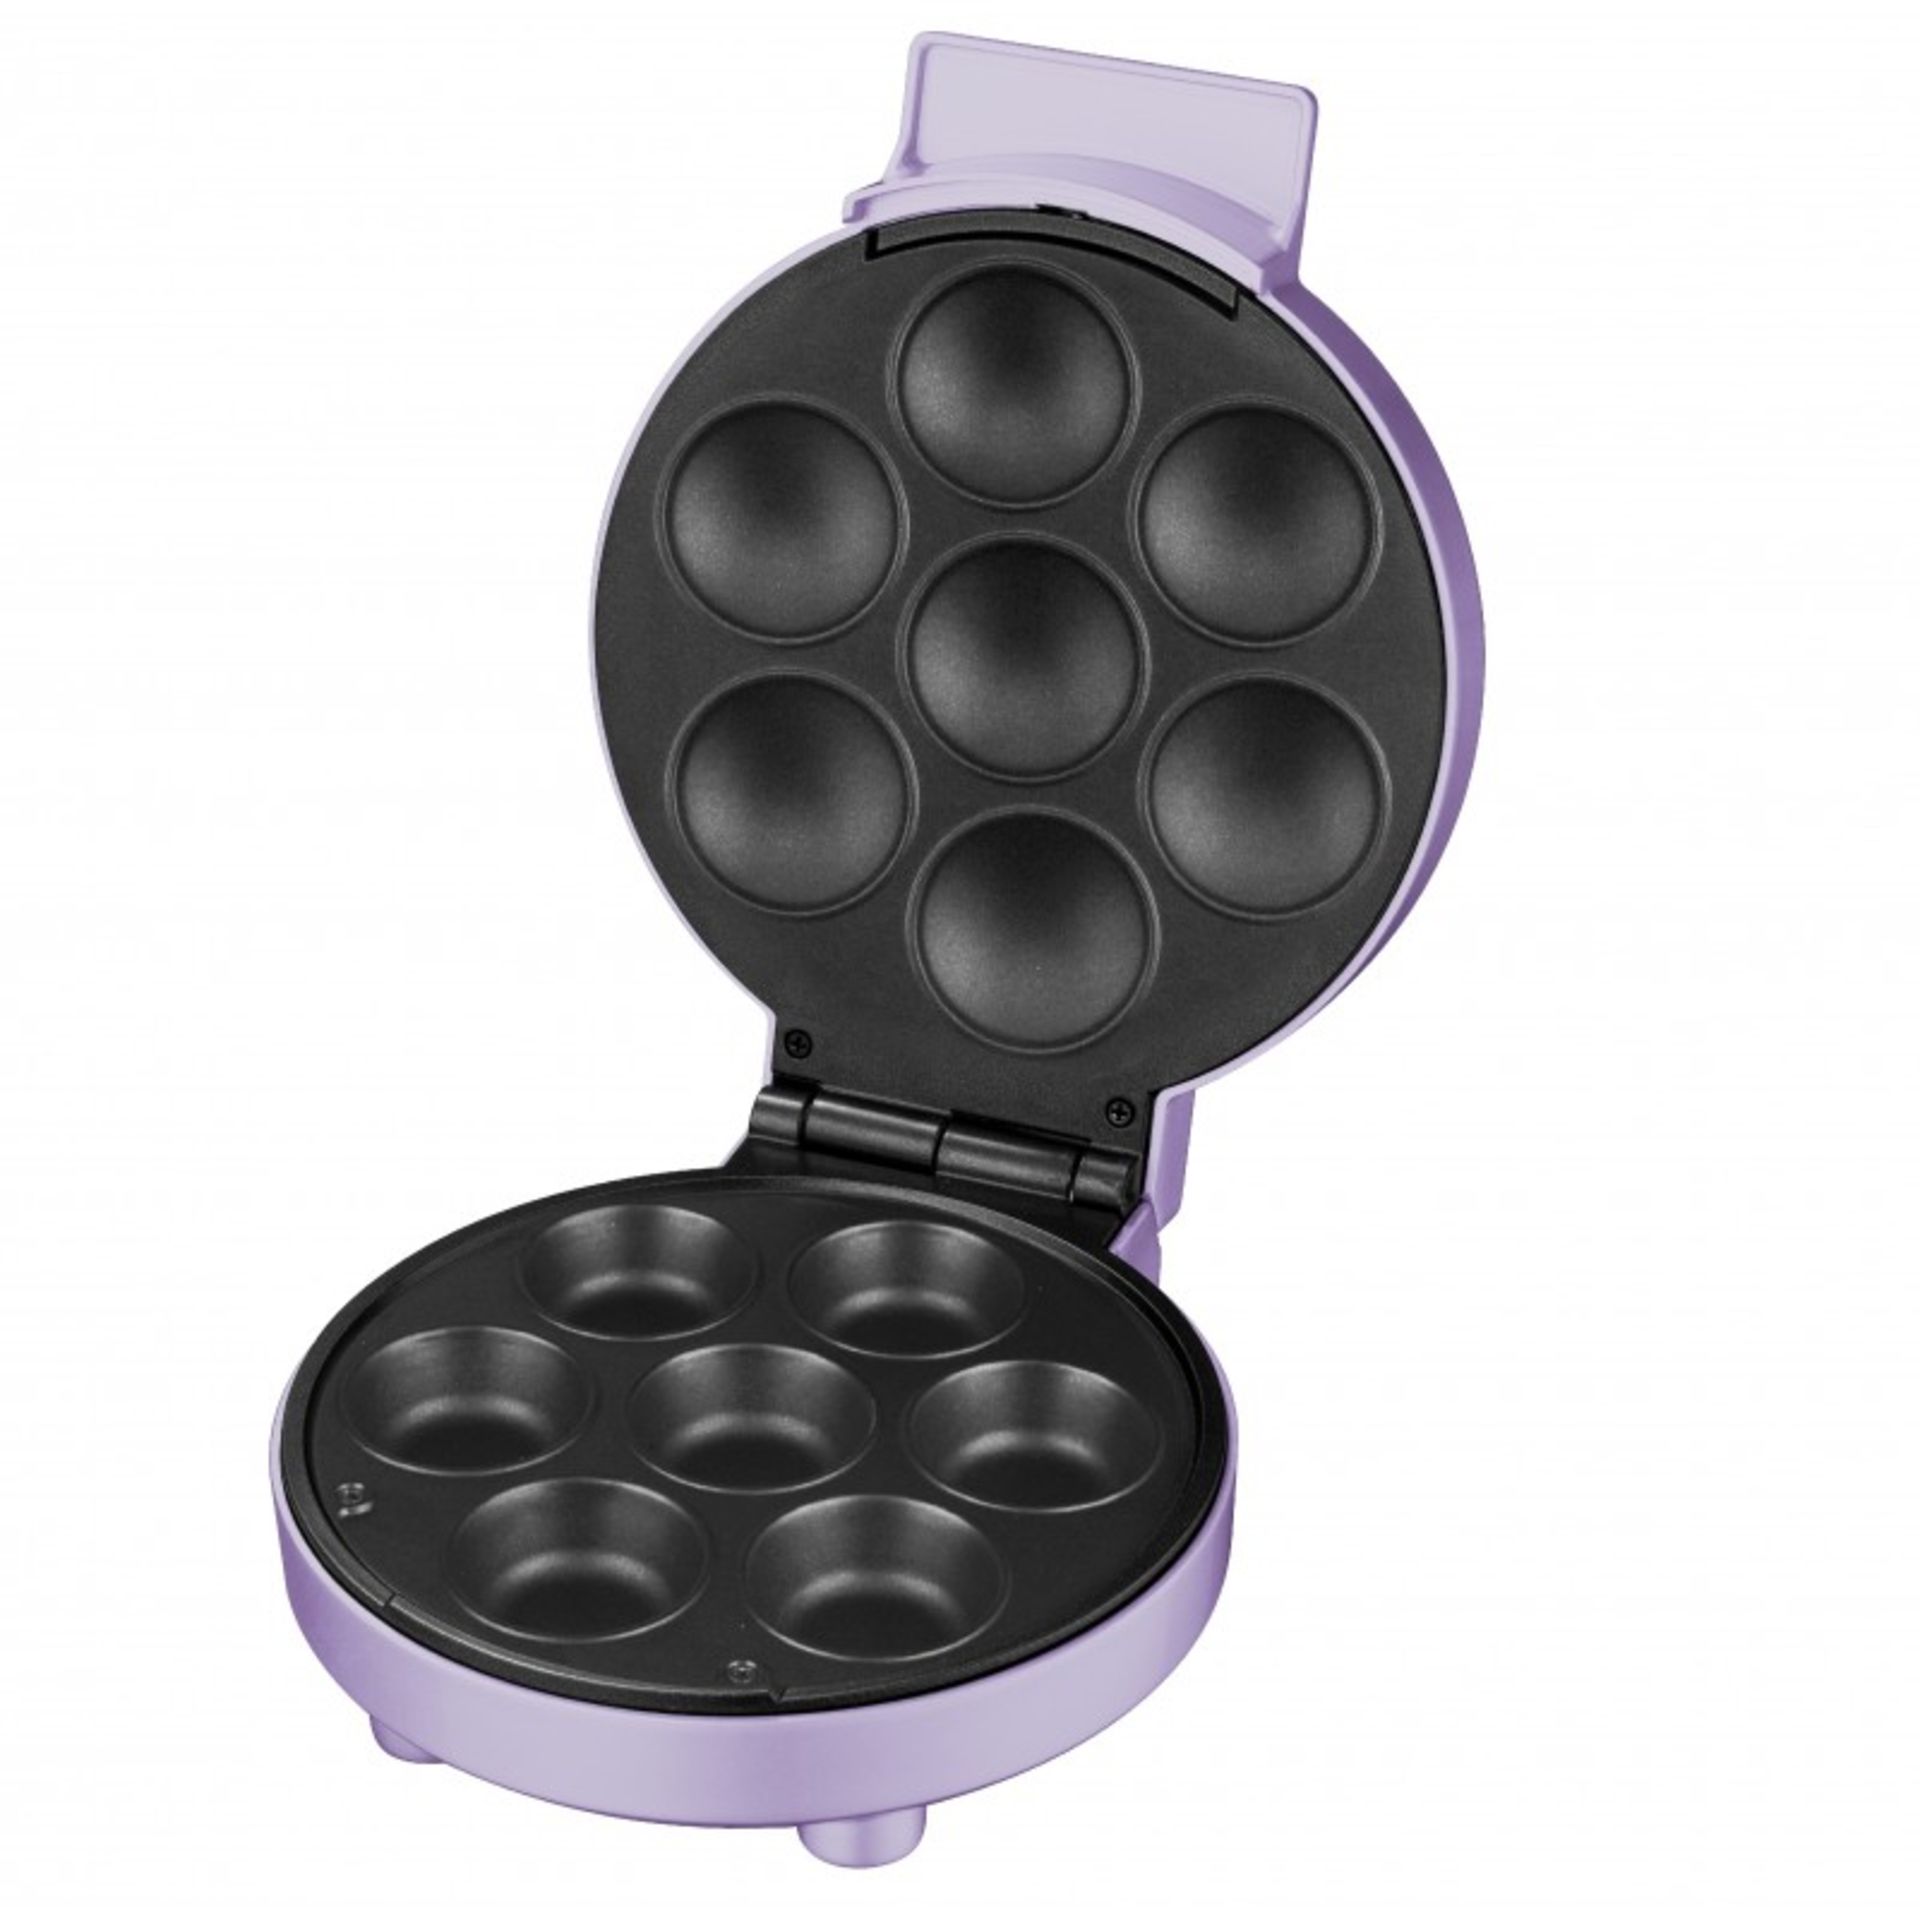 + VAT Brand New Purple 1000w Cupcake Maker - Bakes 7 Delicious Cupcakes in One Session